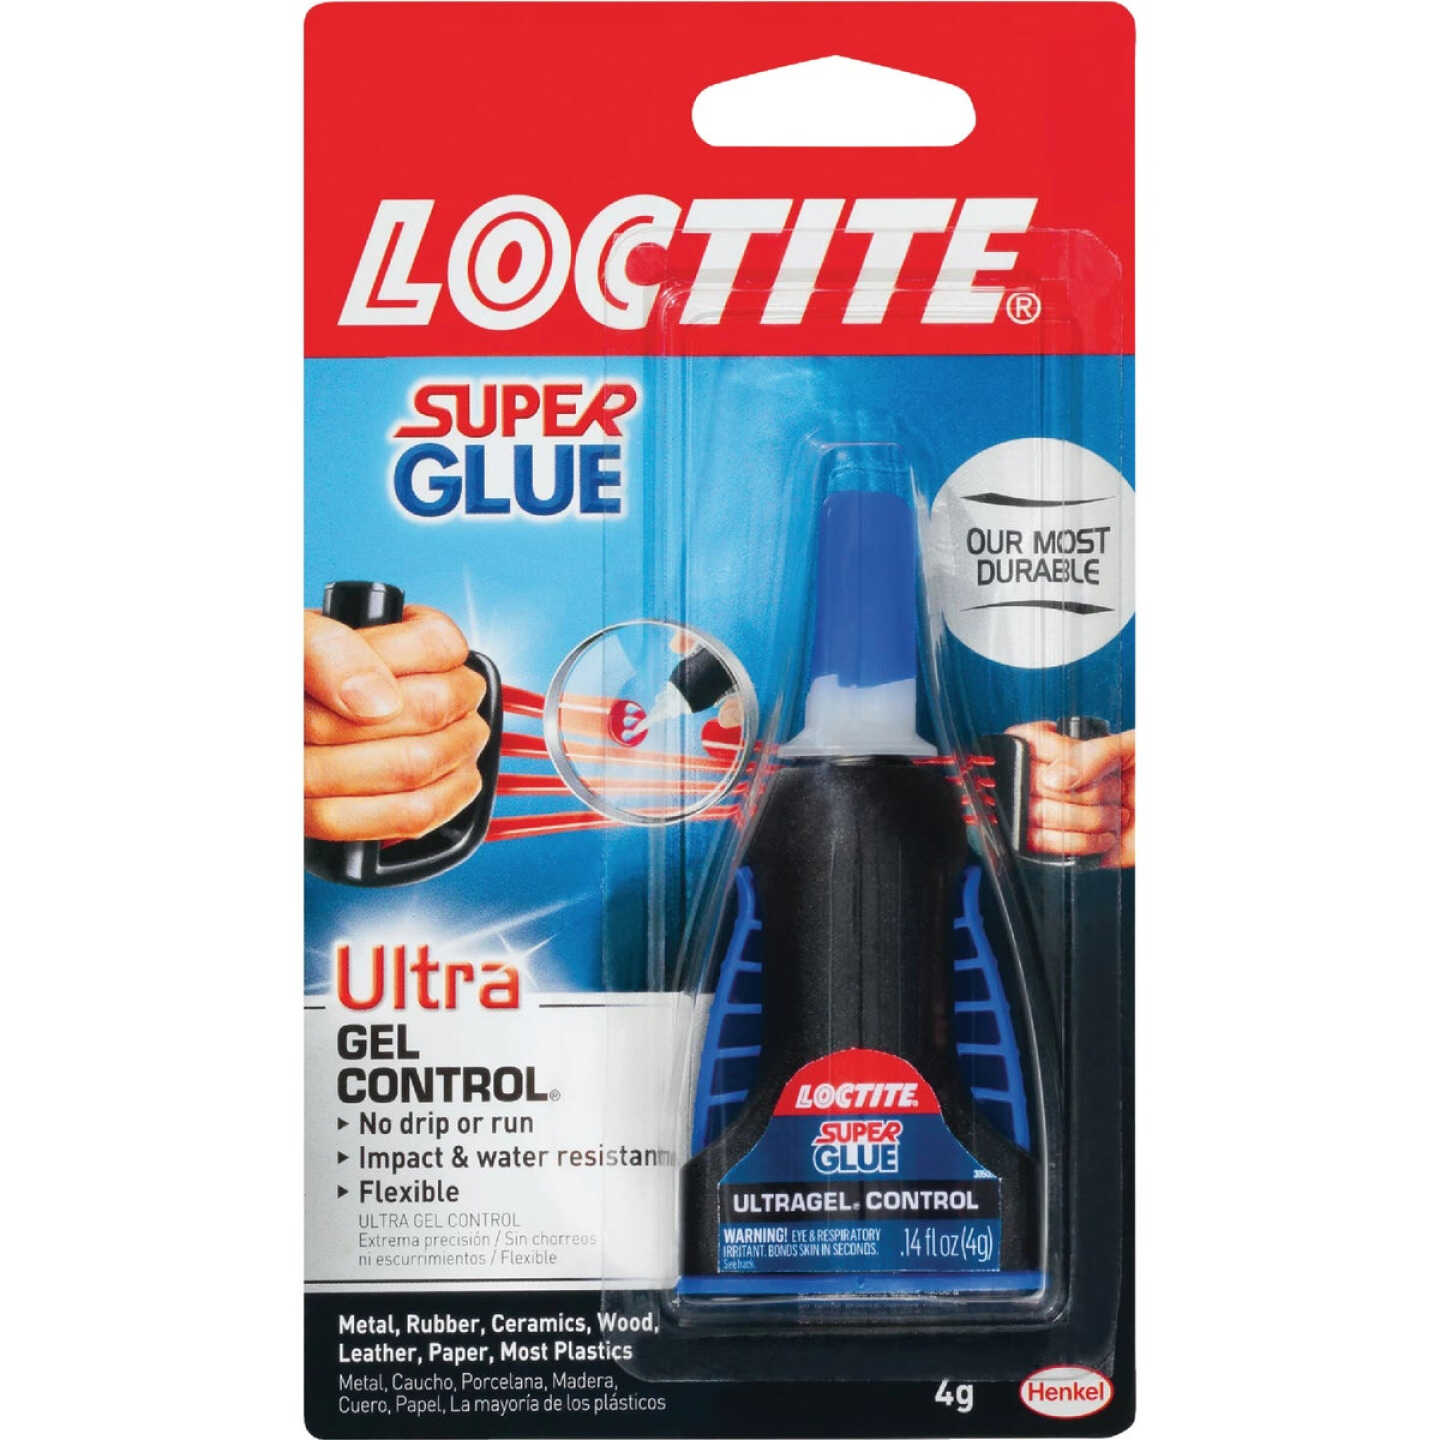 Loctite 406 Instant Adhesive — ADCO Hearing Products